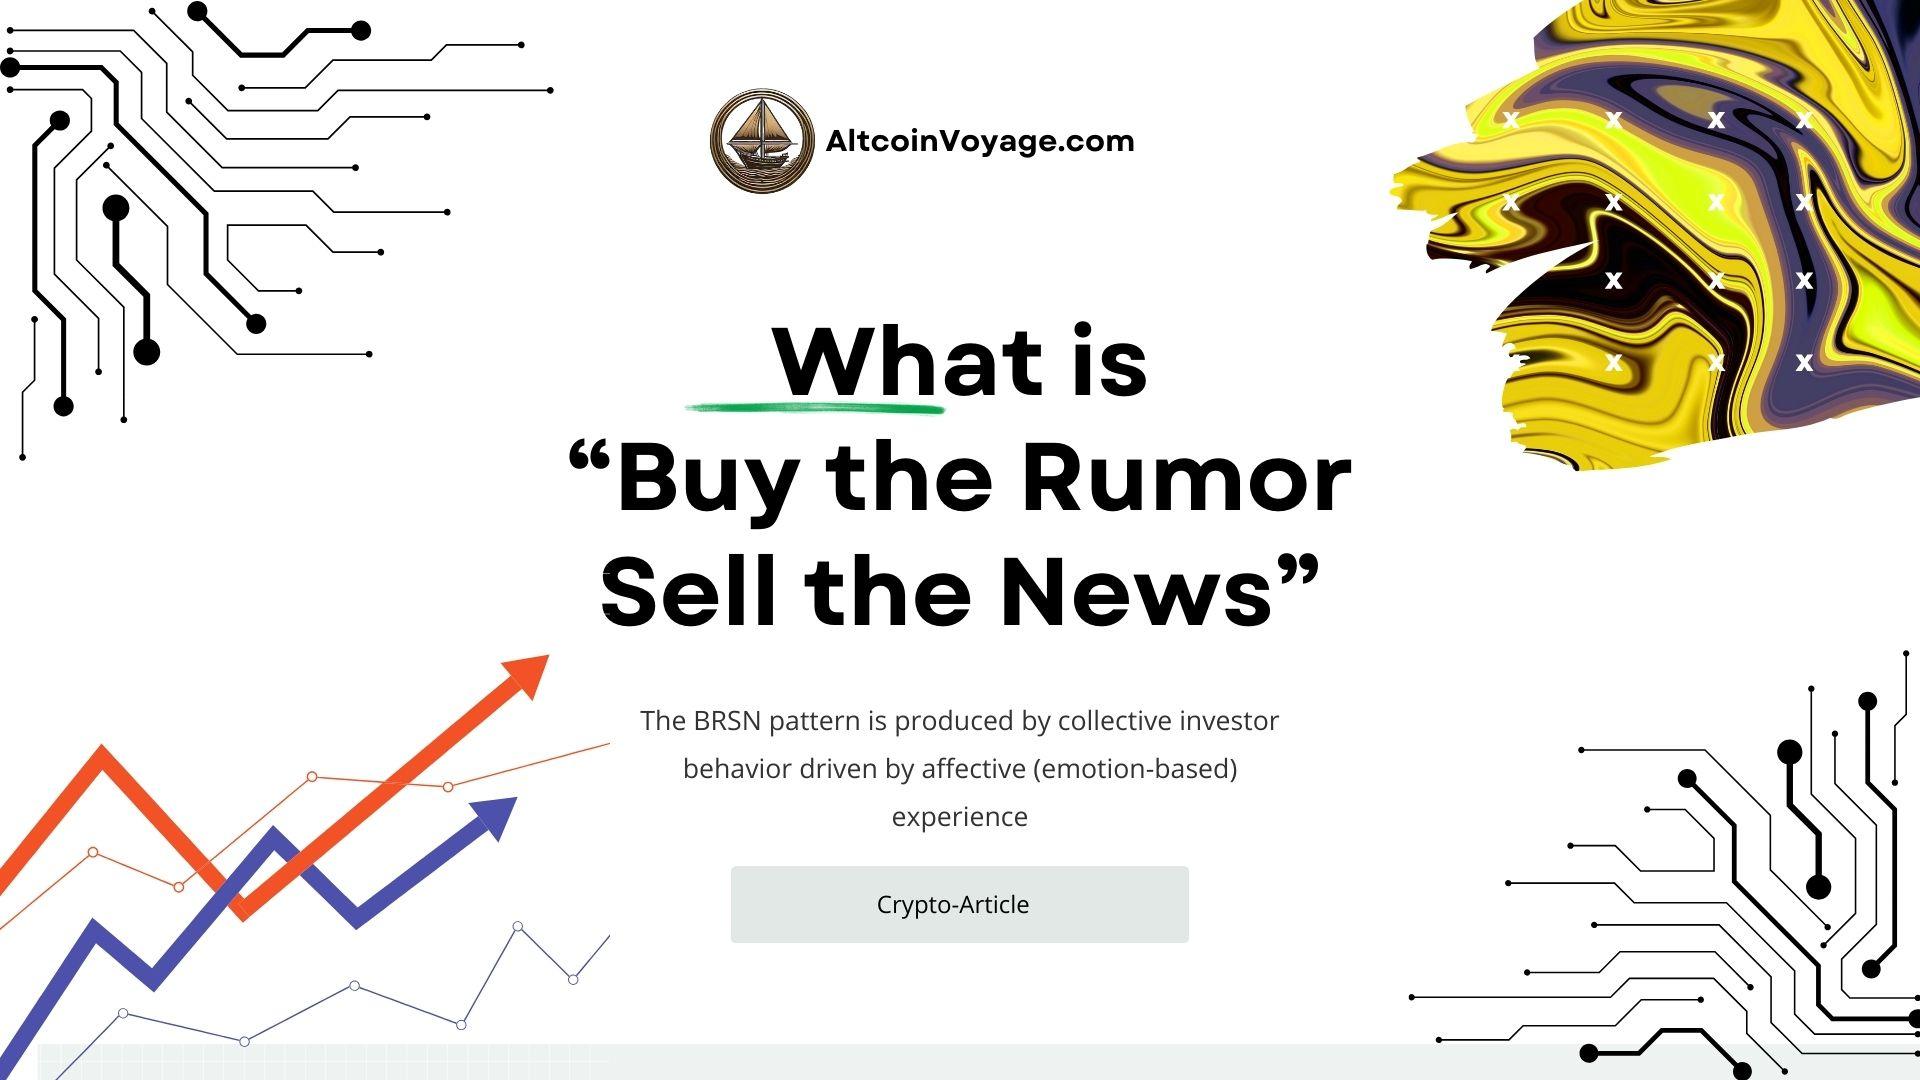 What is Buy the Rumor, Sell the News